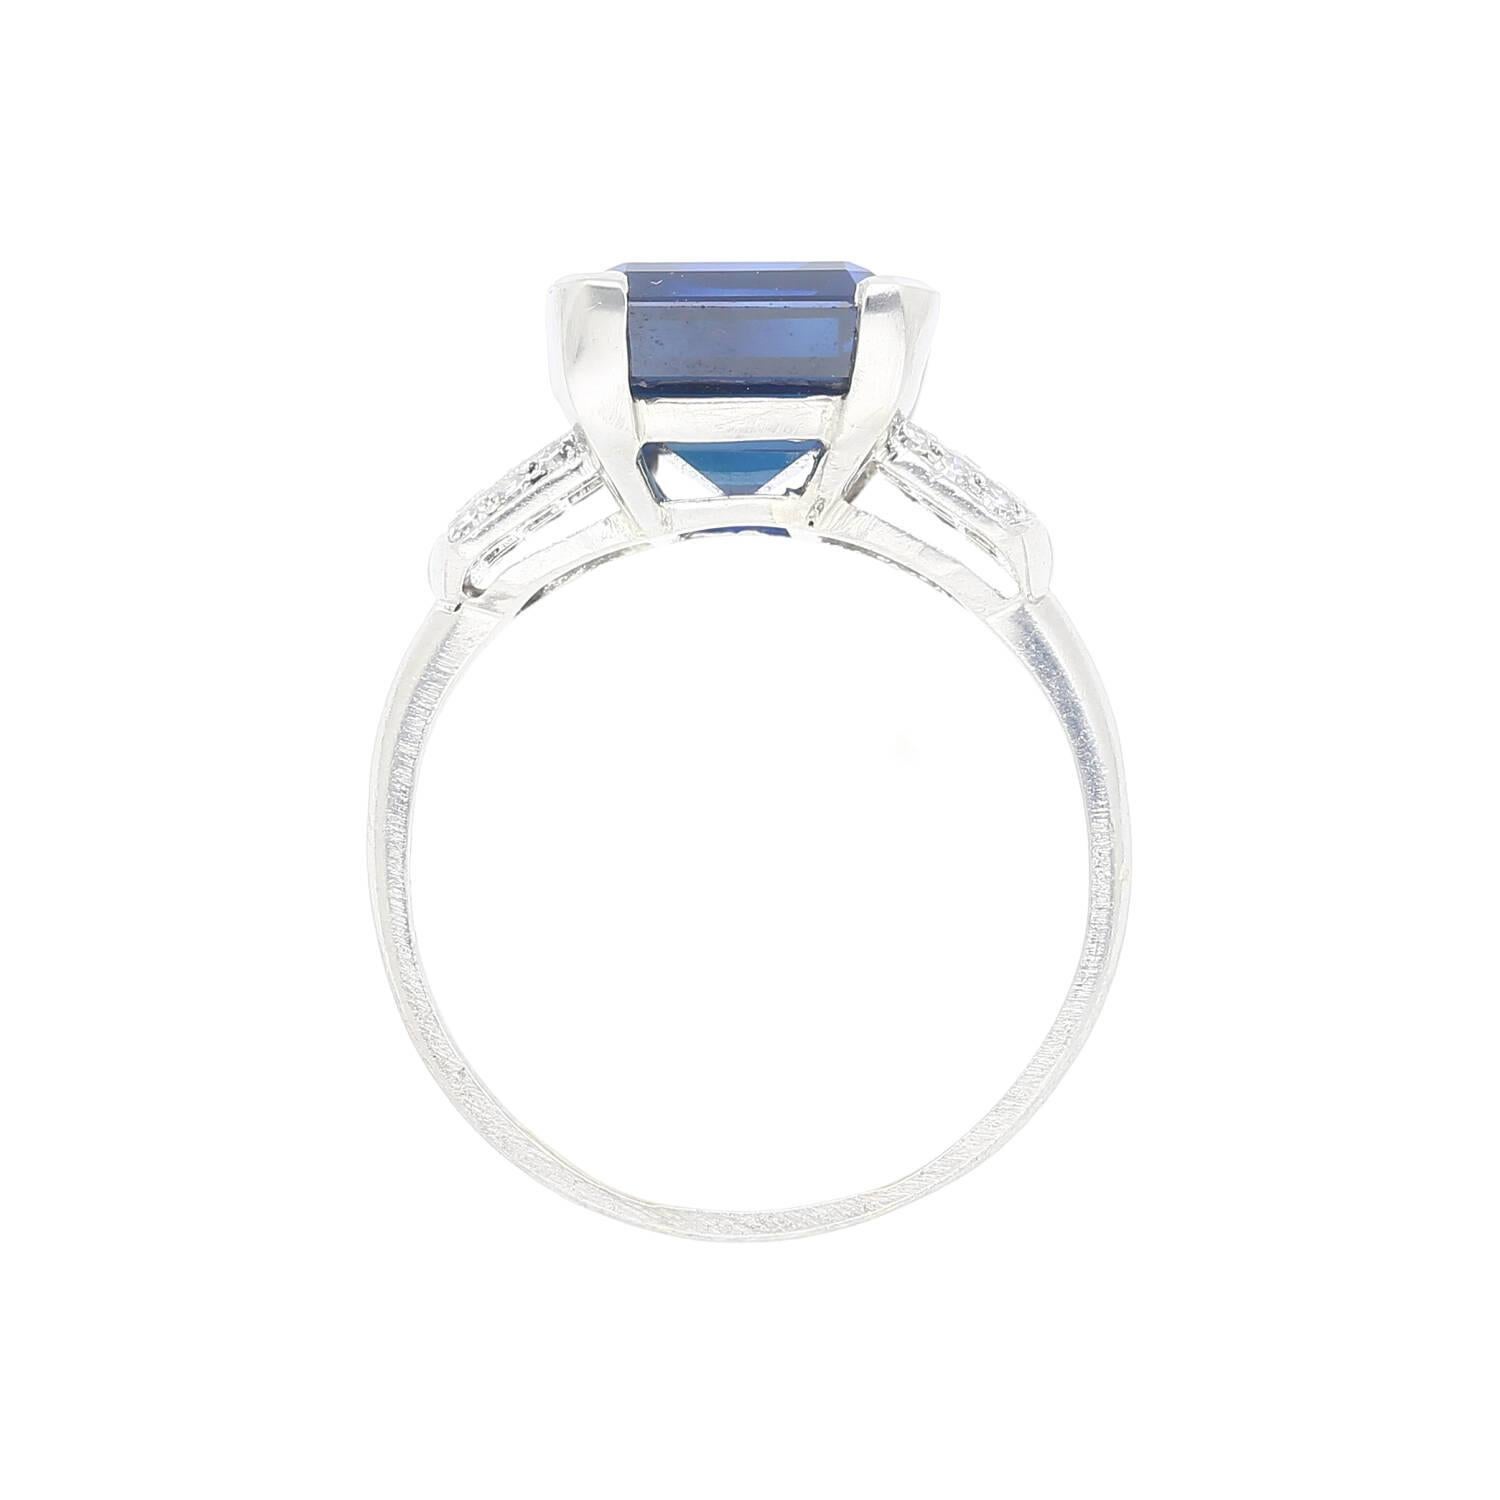 This platinum ring features a 6.80 carat AGL certified Emerald cut Blue Sapphire of Thai origin with no heat treatment, as well as 6 baguette cut diamonds and 12 round cut diamonds. The vintage setting beautifully highlights the sapphire's